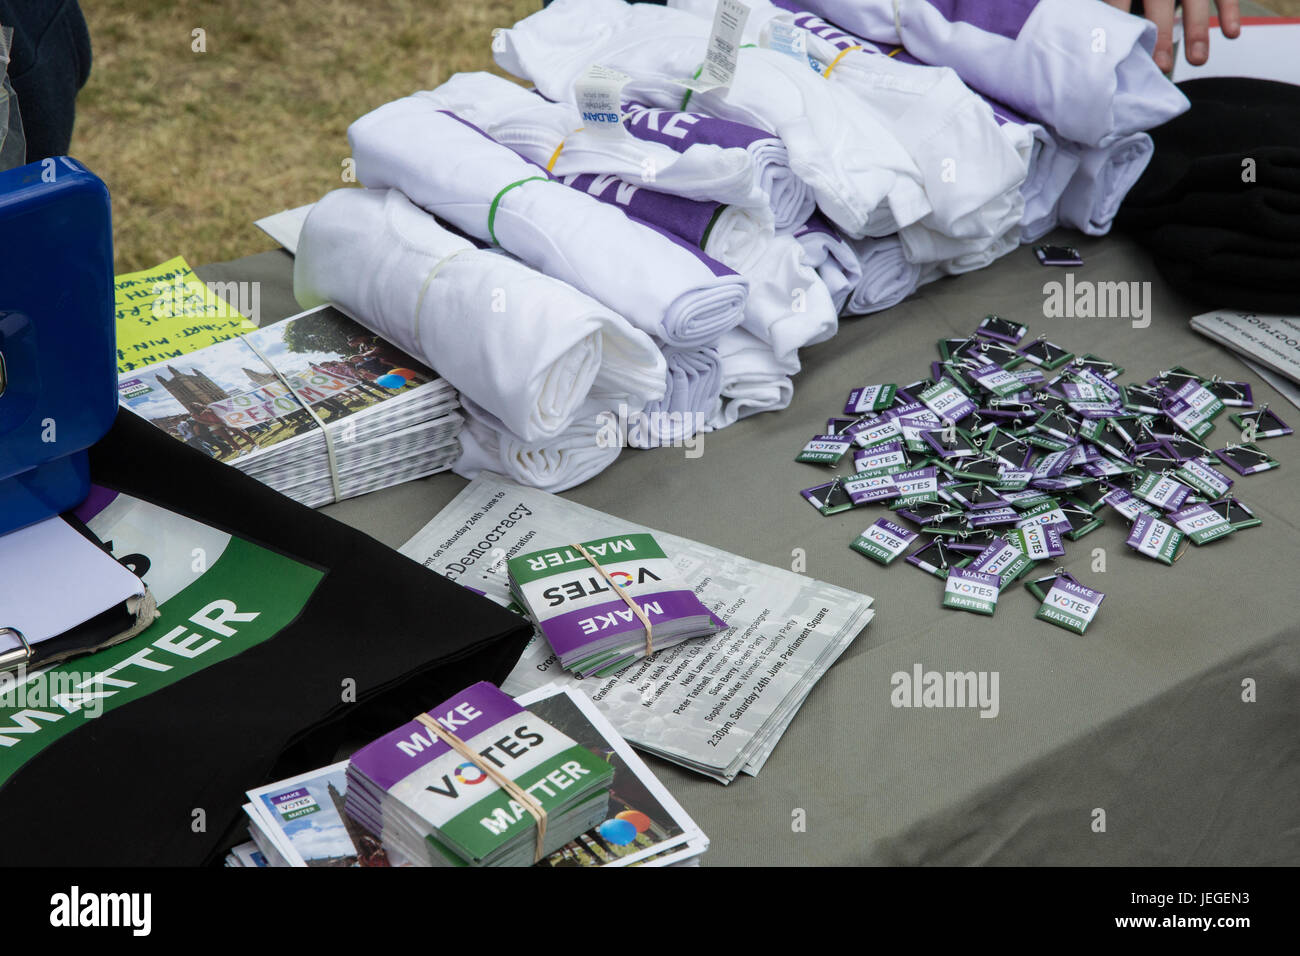 London, UK. 24th June, 2017. PR materials at the Save Our Democracy rally in Parliament Square to call for proportional representation and to plan for the end to the UK's undemocratic first-past-the-post voting system. Credit: Mark Kerrison/Alamy Live News Stock Photo